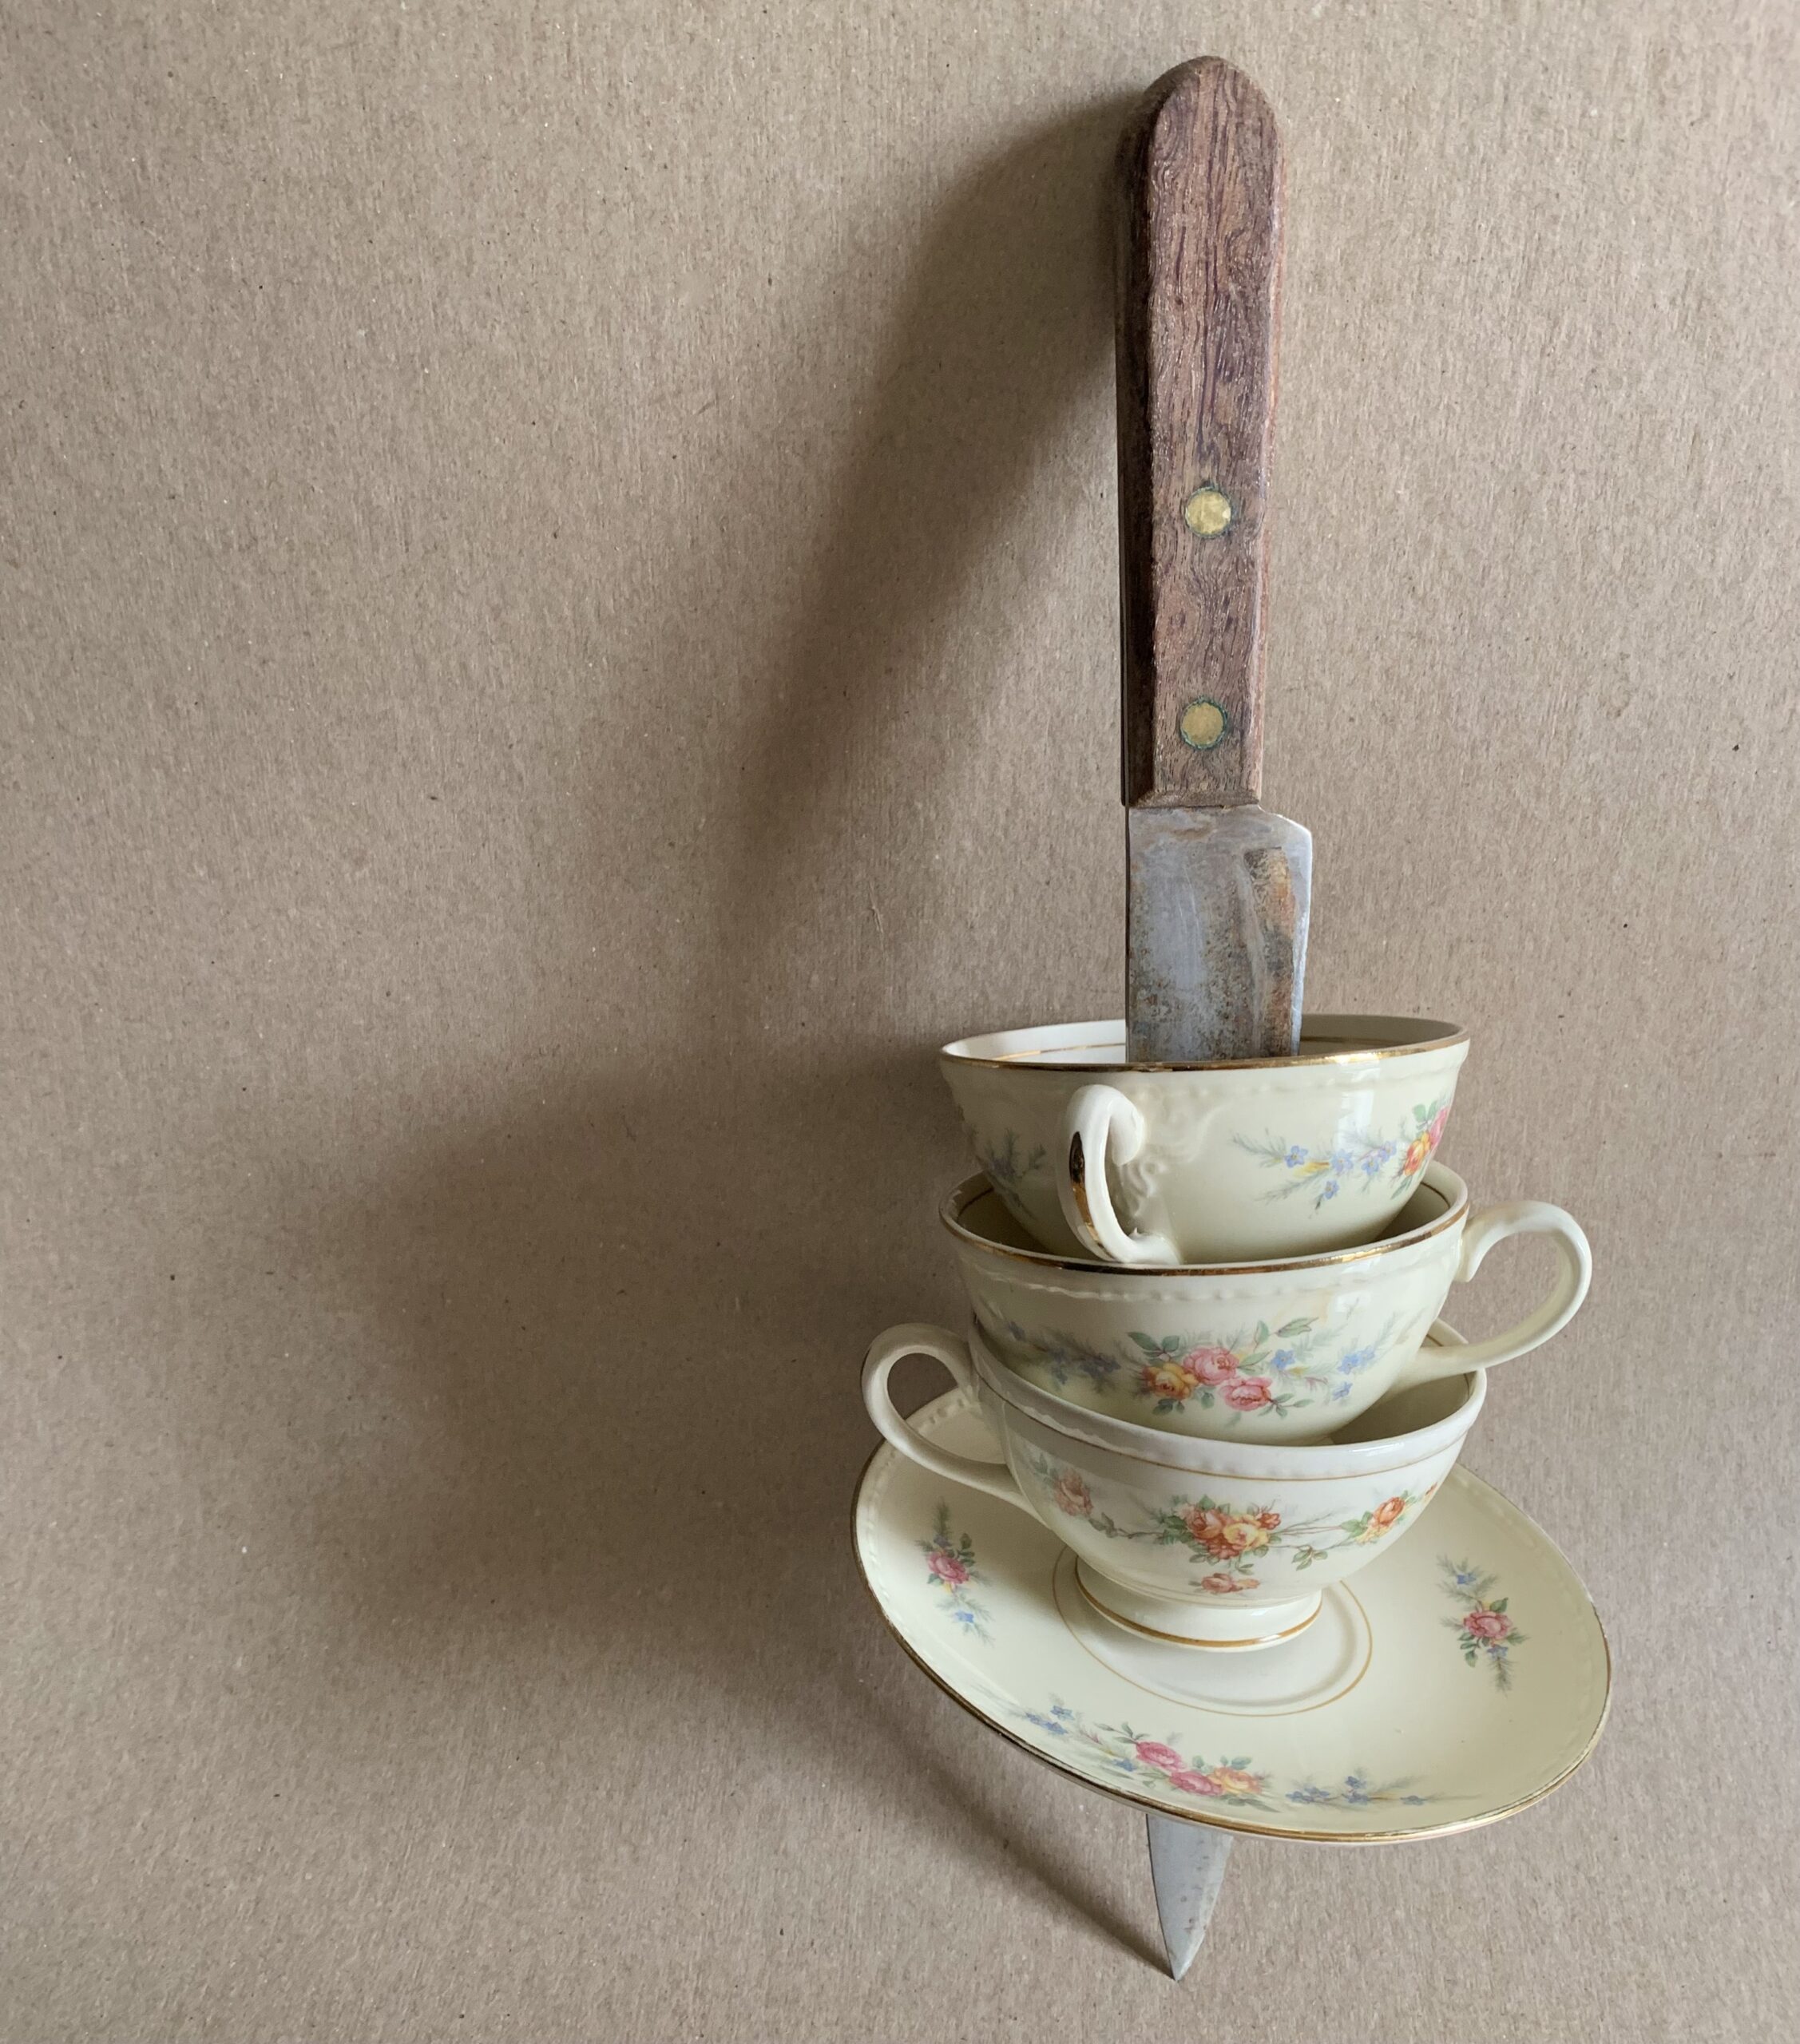 A large knife spears a stack of teacups.